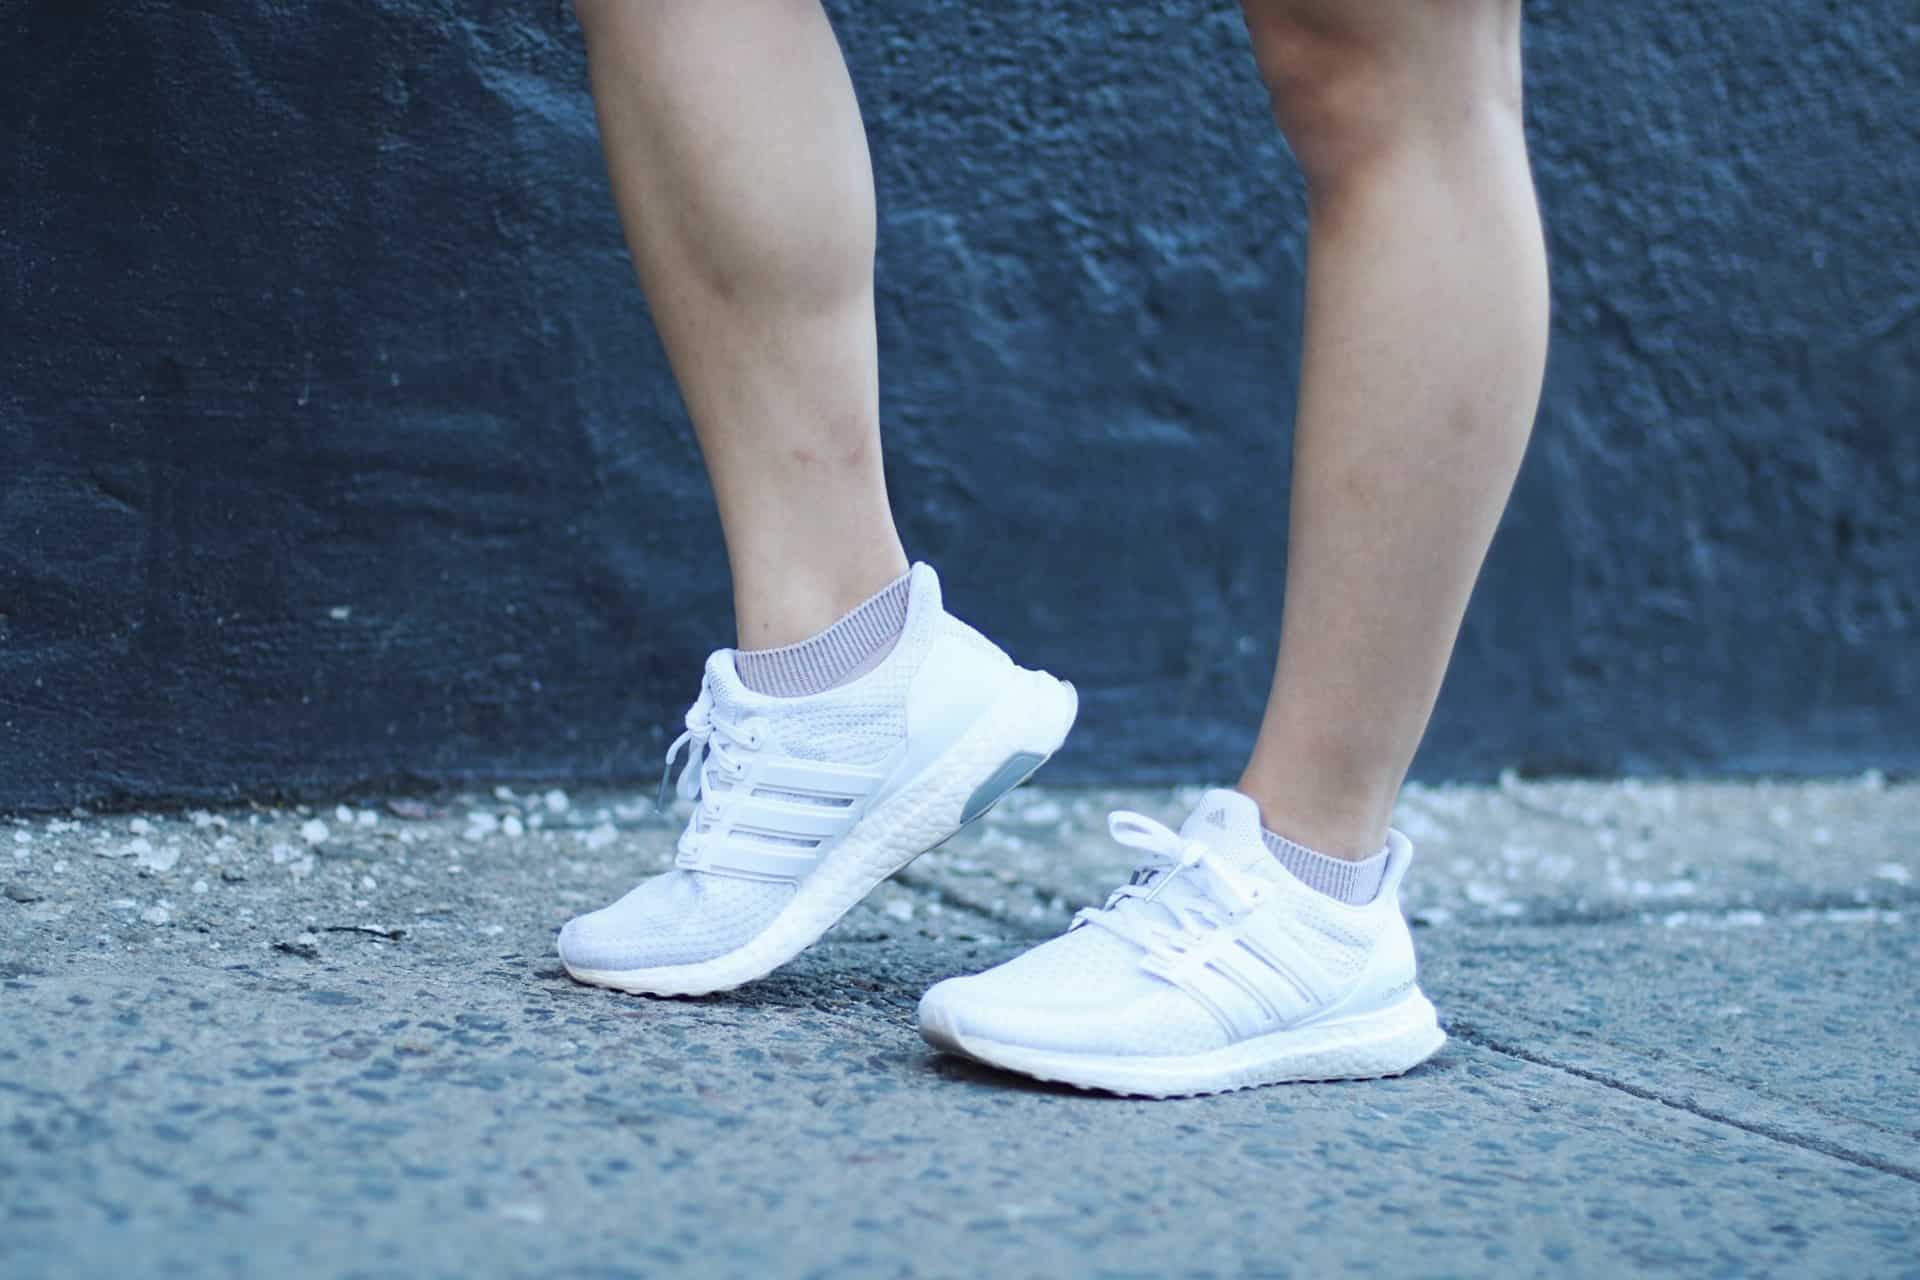 How to style white sneakers for spring weather | casual spring outfit ideas and inspiration | styling Adidas triple white Ultra Boost sneakers | Diary of a Toronto Girl, a Canadian lifestyle blog